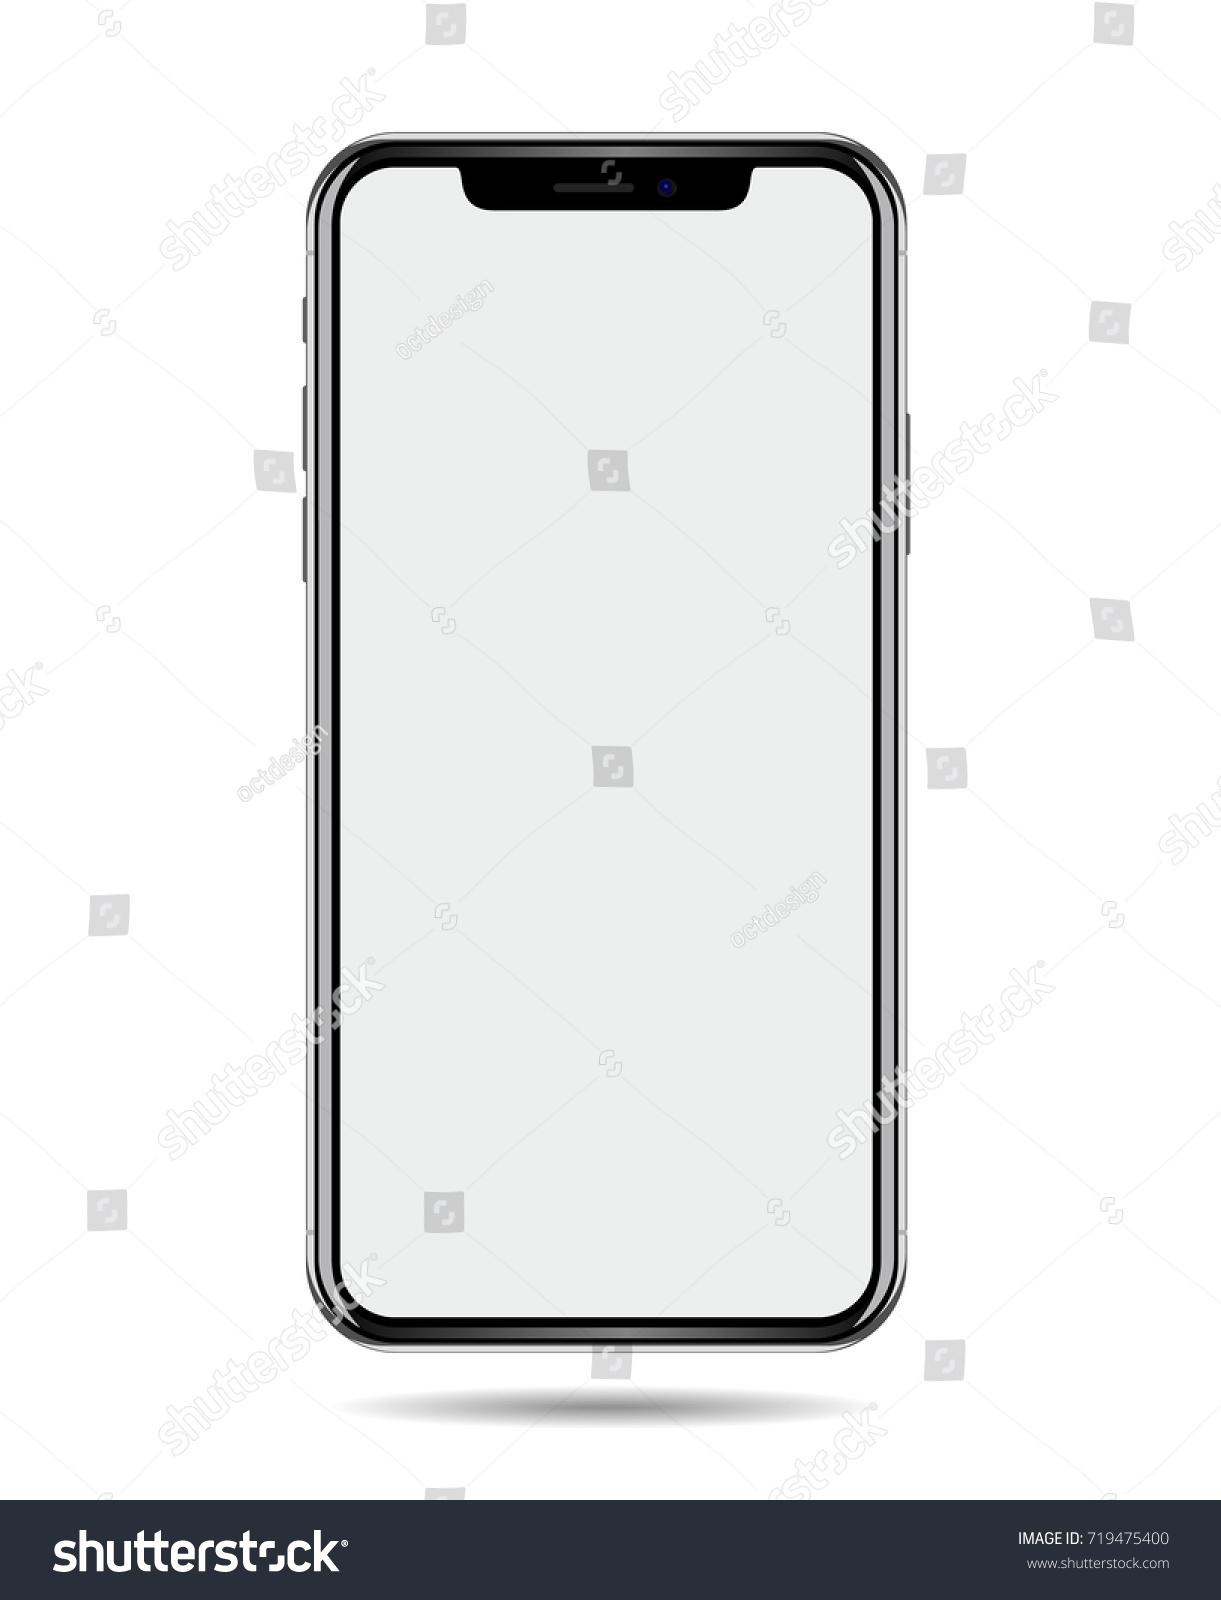 New Phone Vector Drawing Isolated On Stock Vector 719475400 - Shutterstock